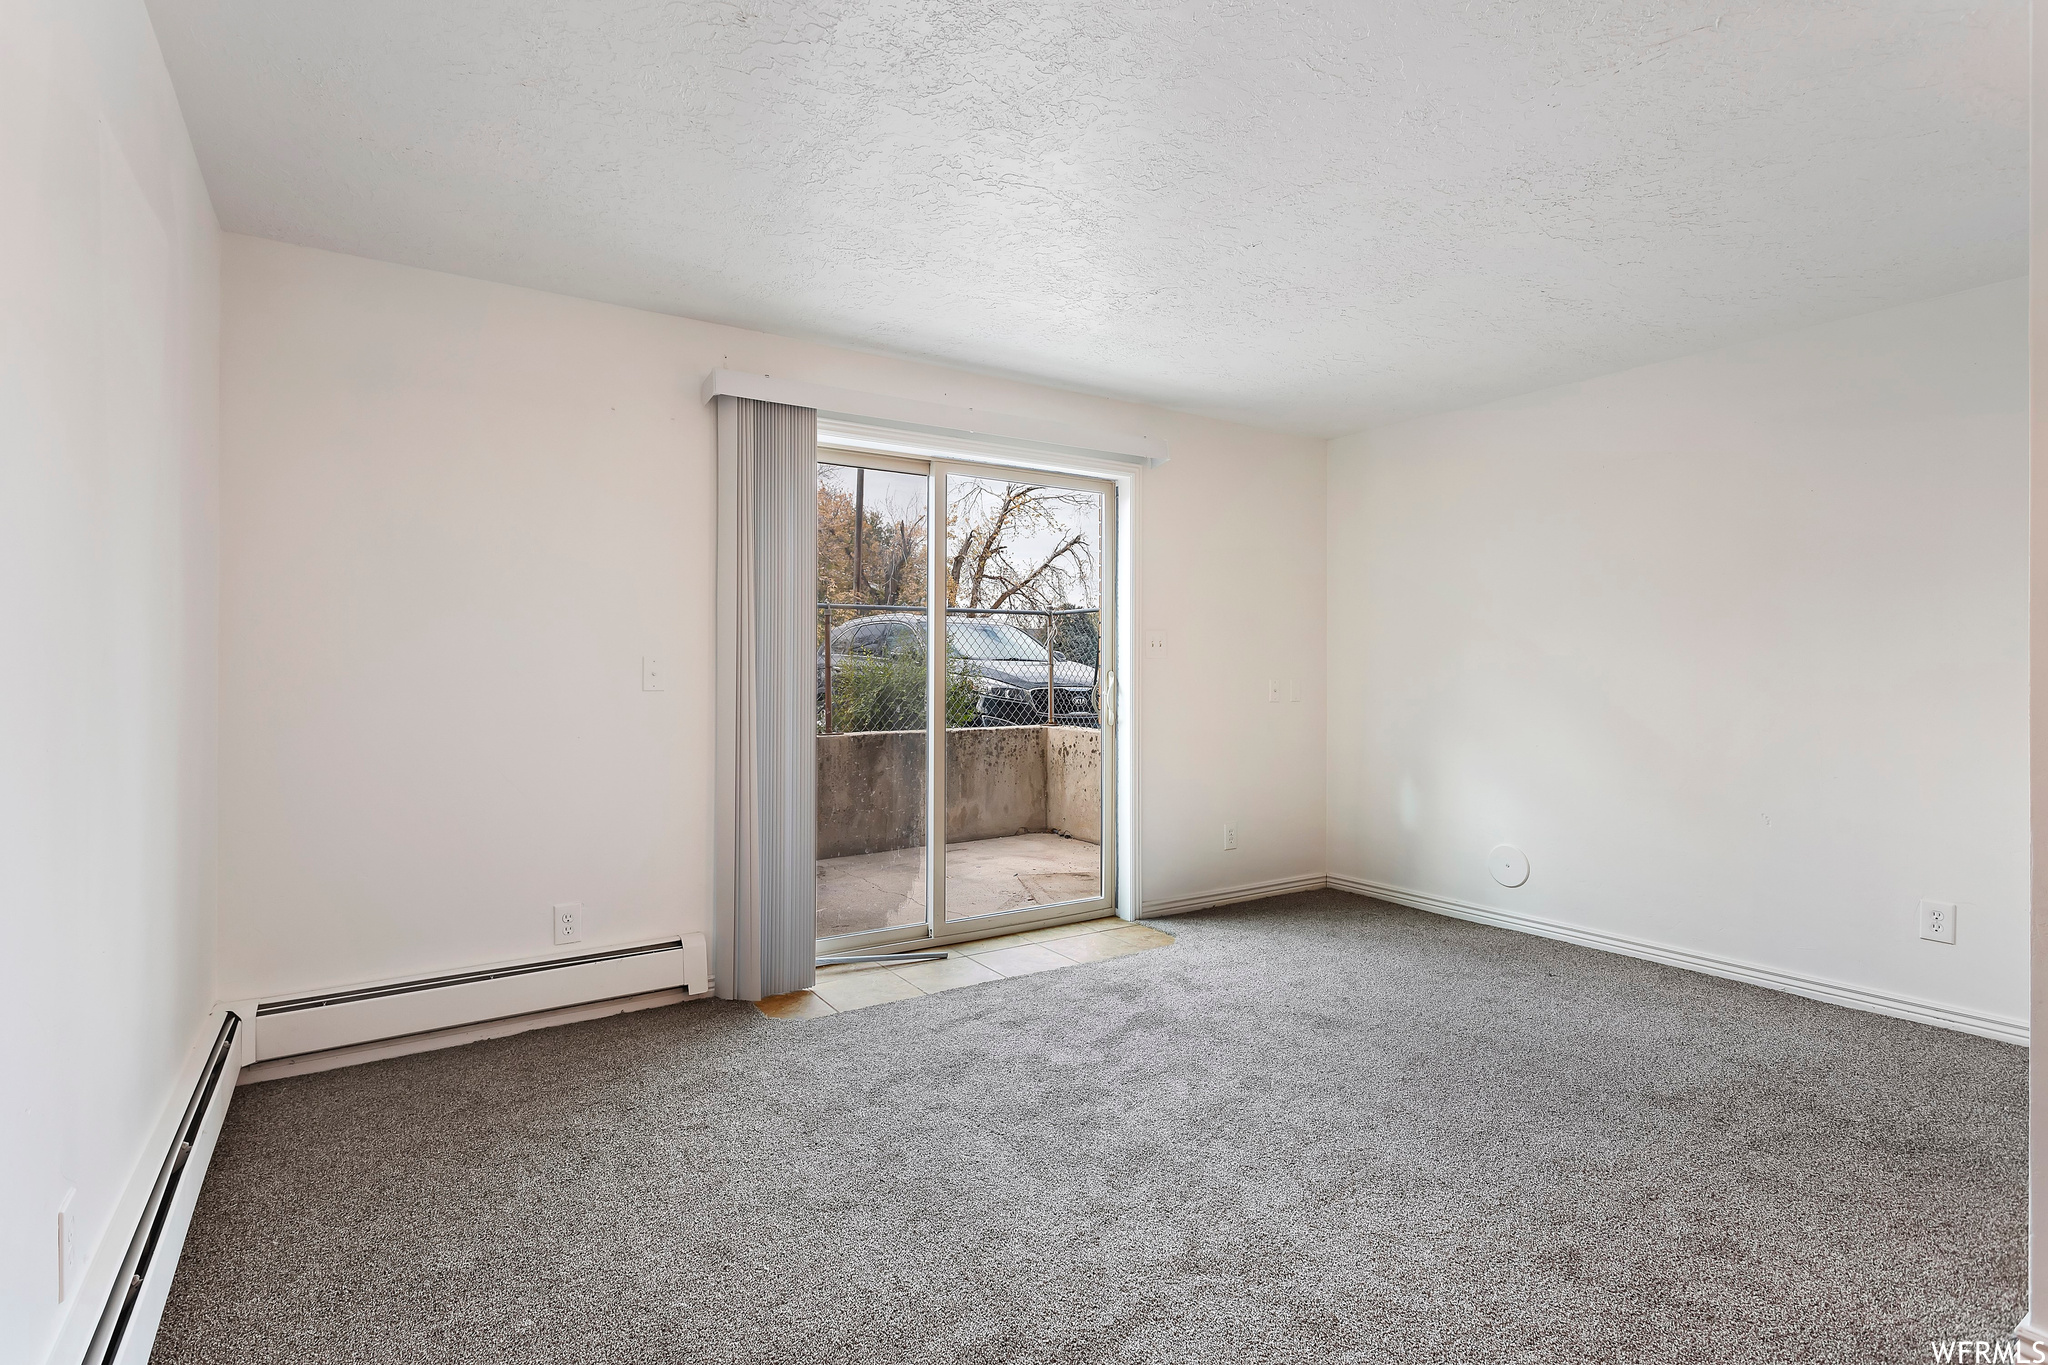 Carpeted spare room with a textured ceiling and a baseboard heating unit